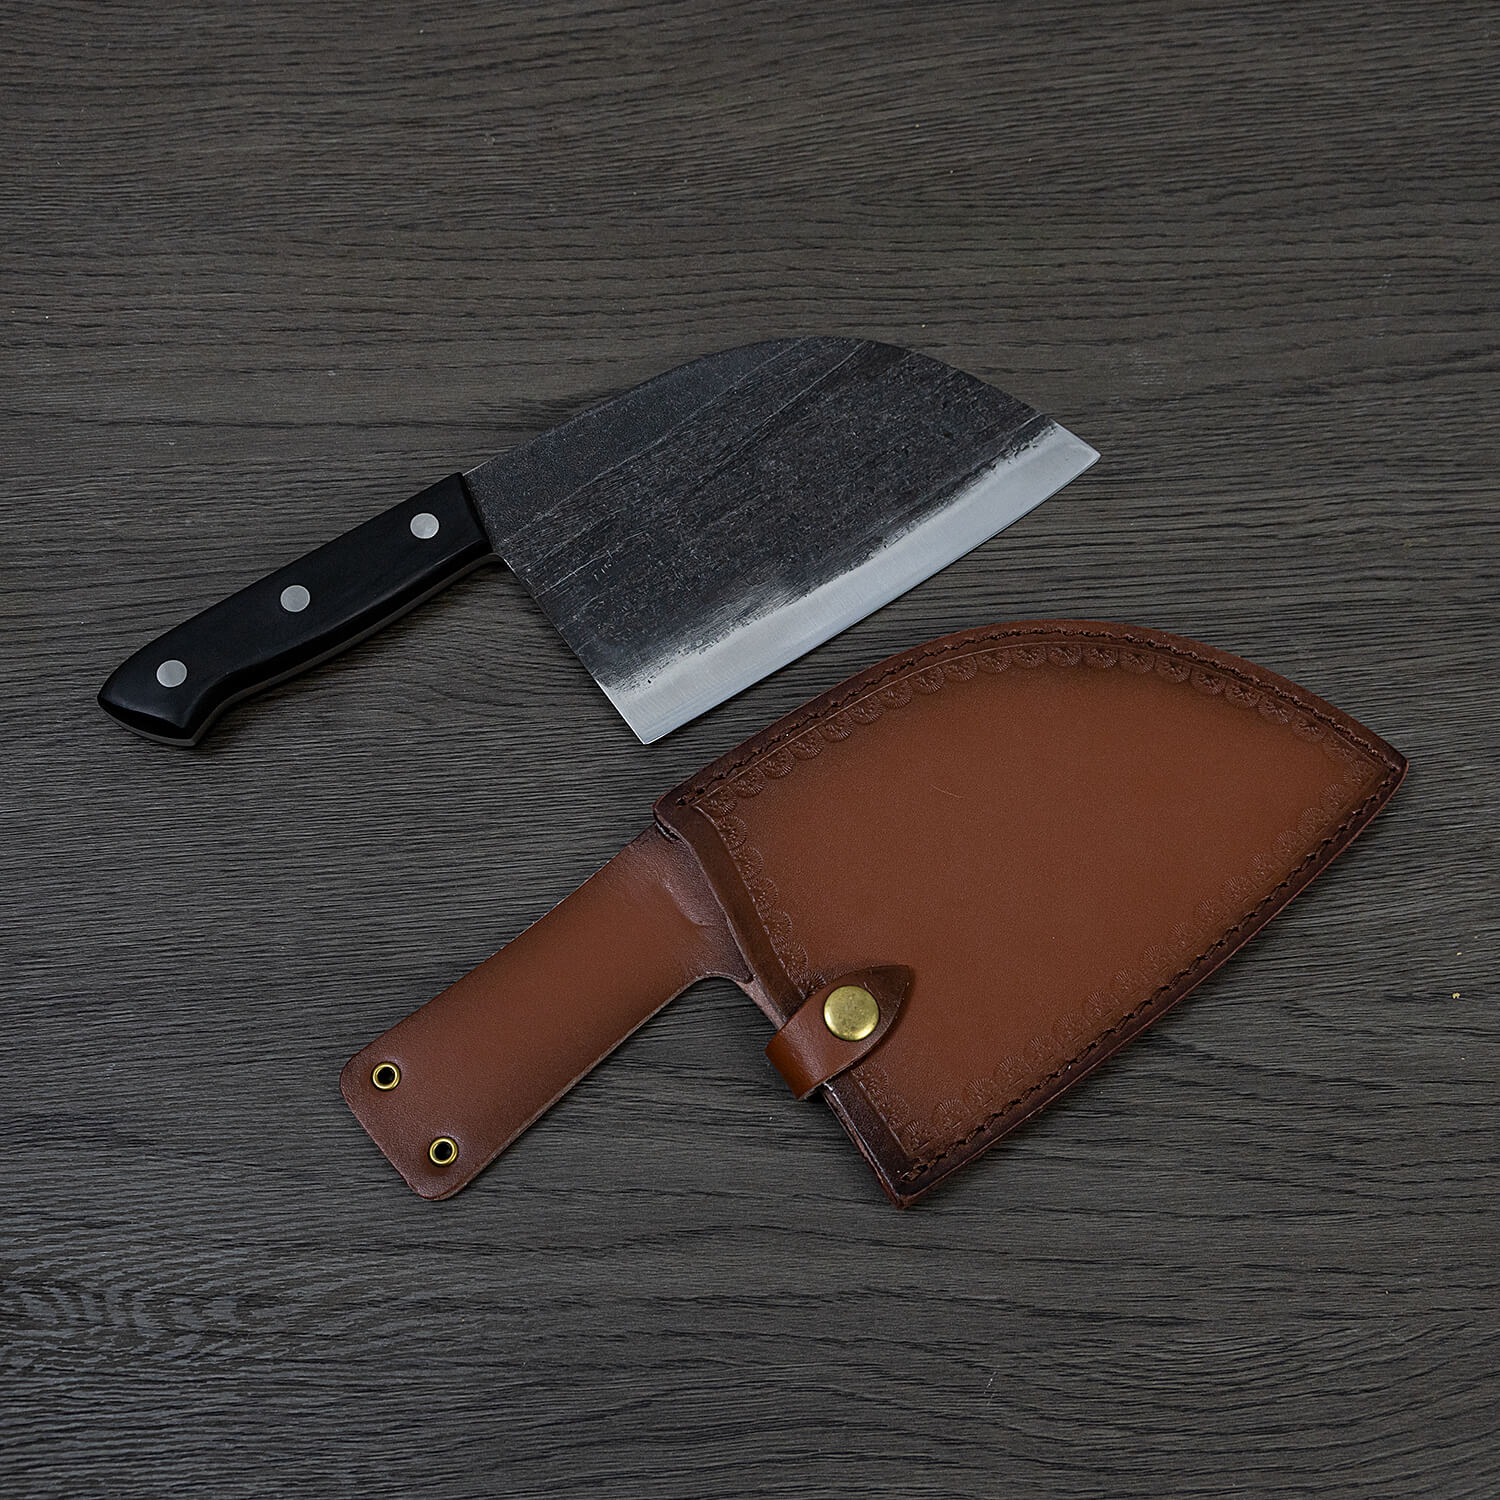 Enhance your kitchen with a Serbian Cleaver Knife accompanied by a leather sheath, beautifully displayed on a table.